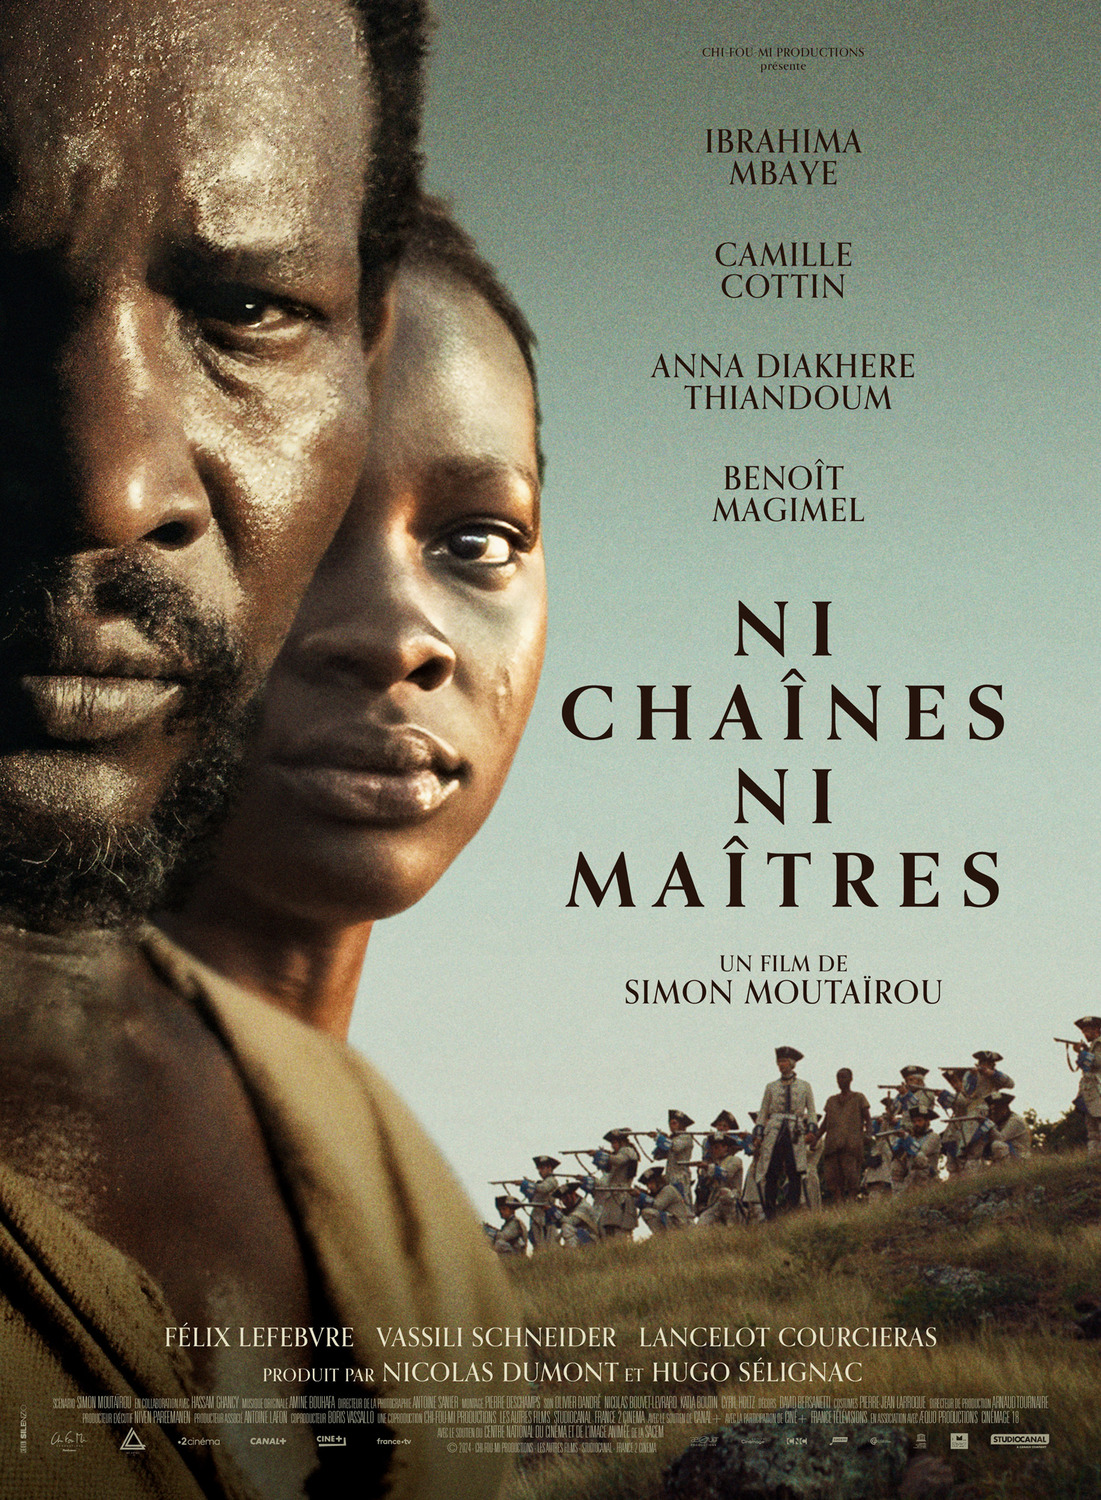 Extra Large Movie Poster Image for Ni chaînes ni maîtres 